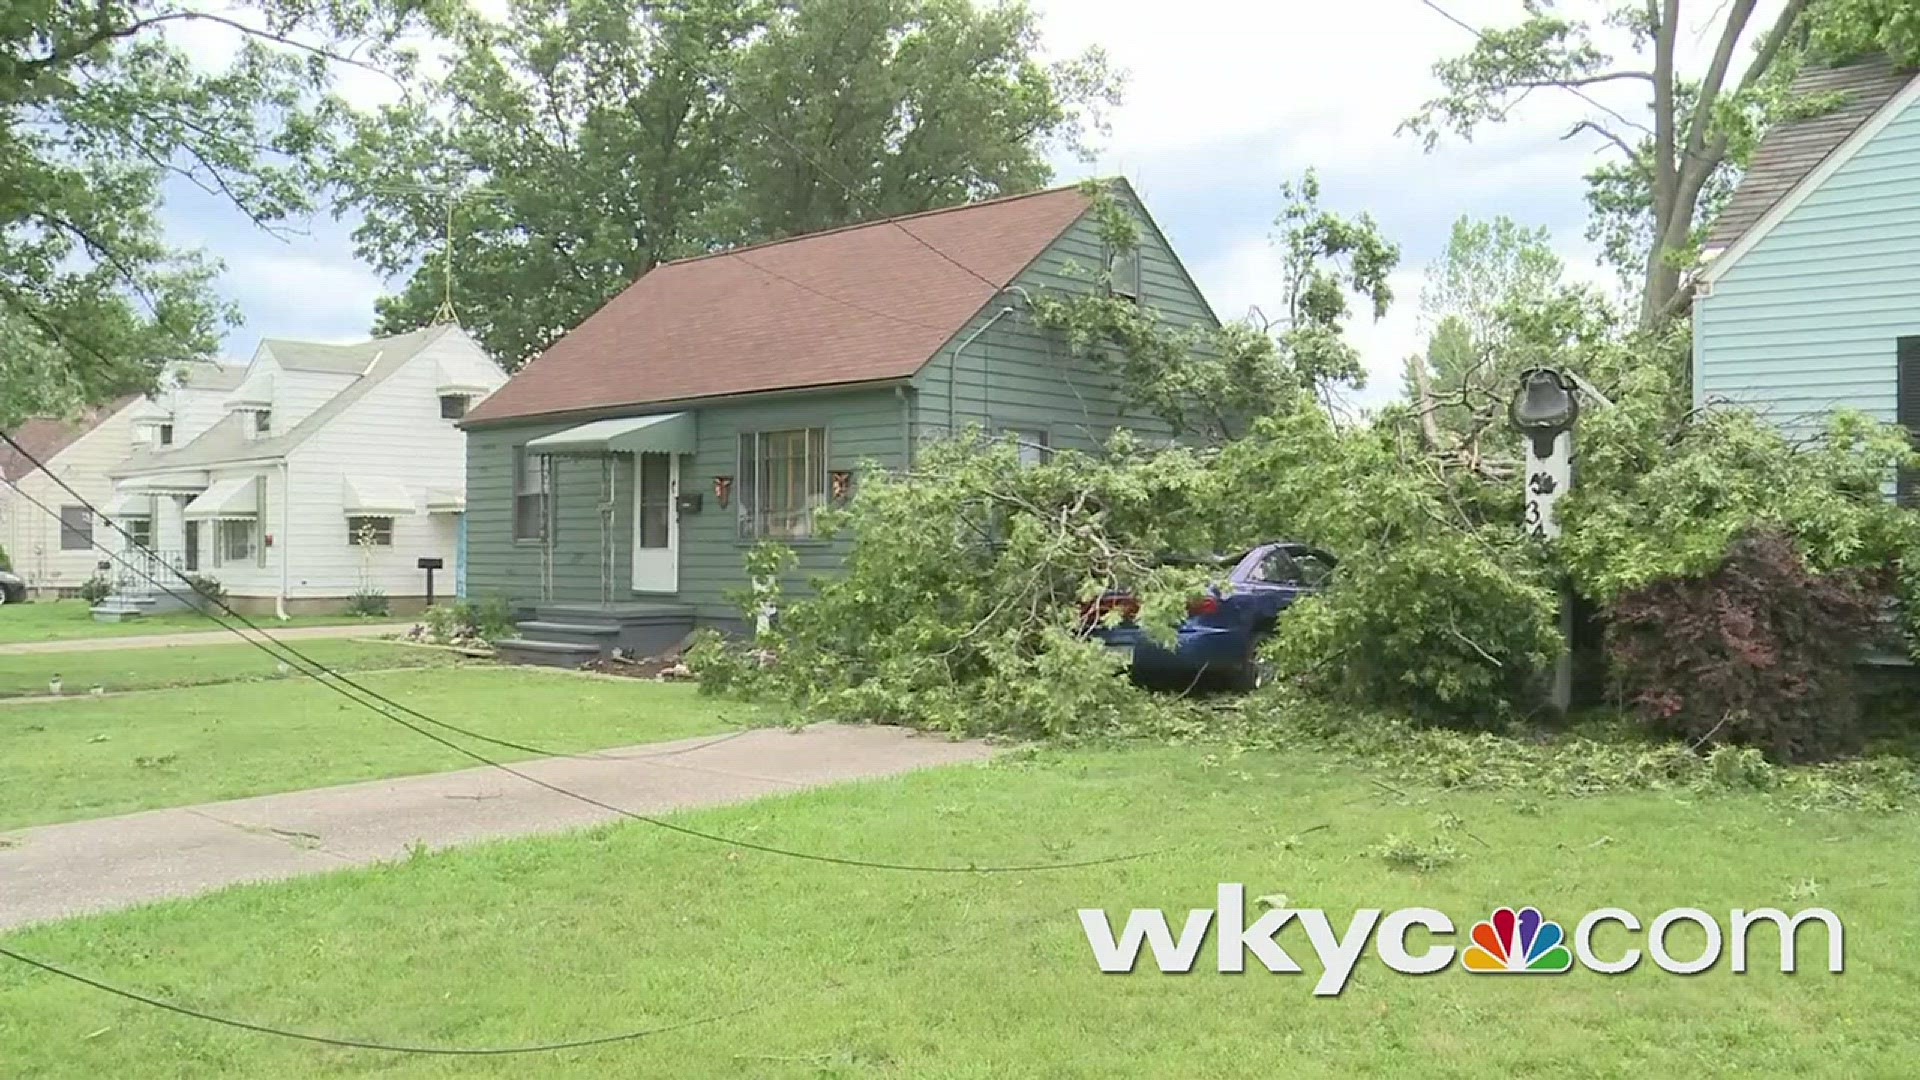 Early morning storms brought trees down on Crehore Street in Lorain. #3weather